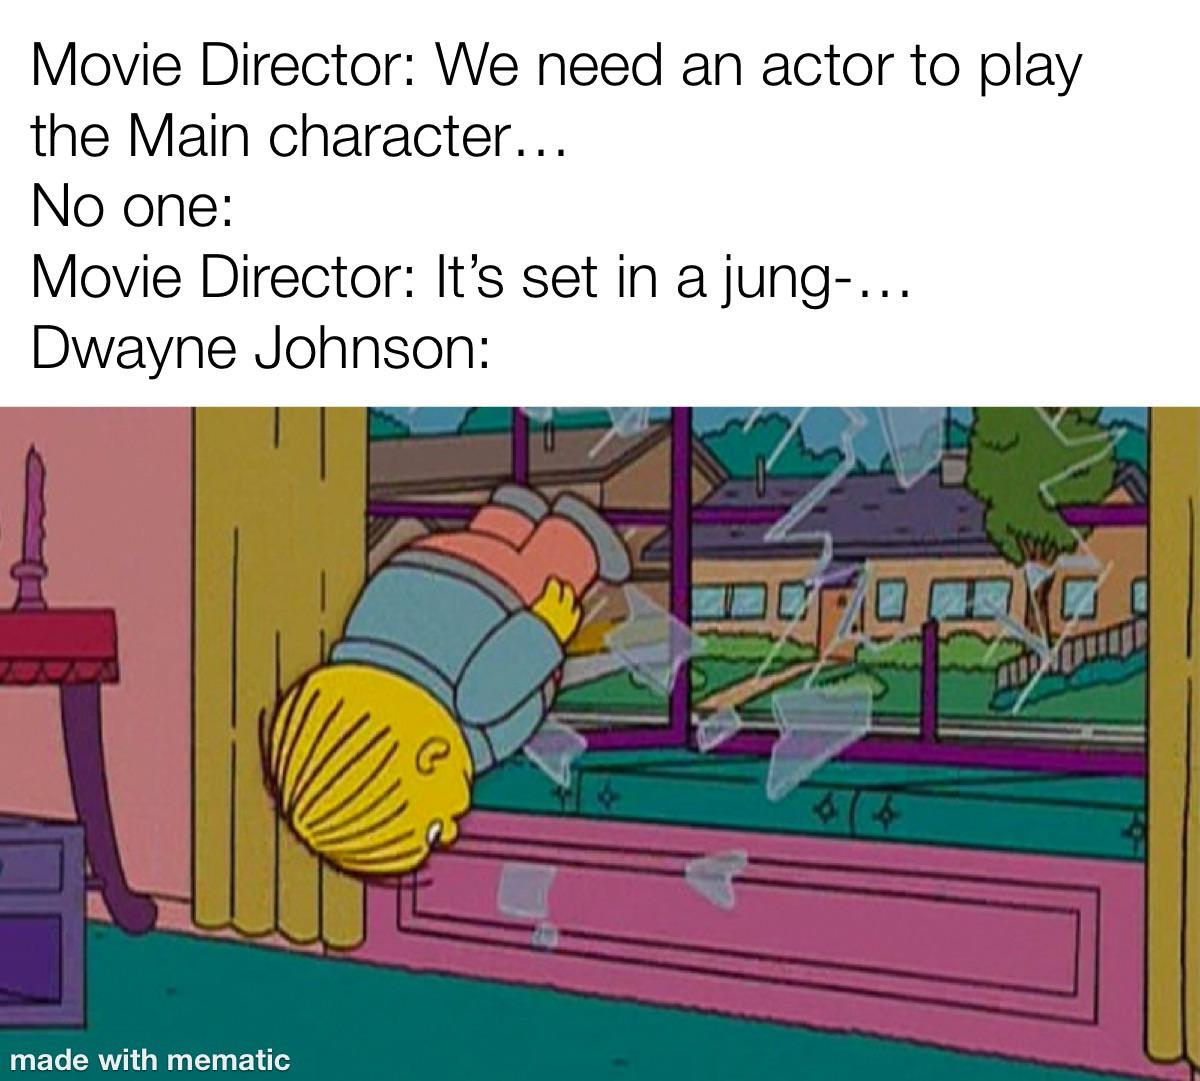 funny memes - im a brick - Movie Director We need an actor to play the Main character... No one Movie Director It's set in a jung... Dwayne Johnson 20 made with mematic